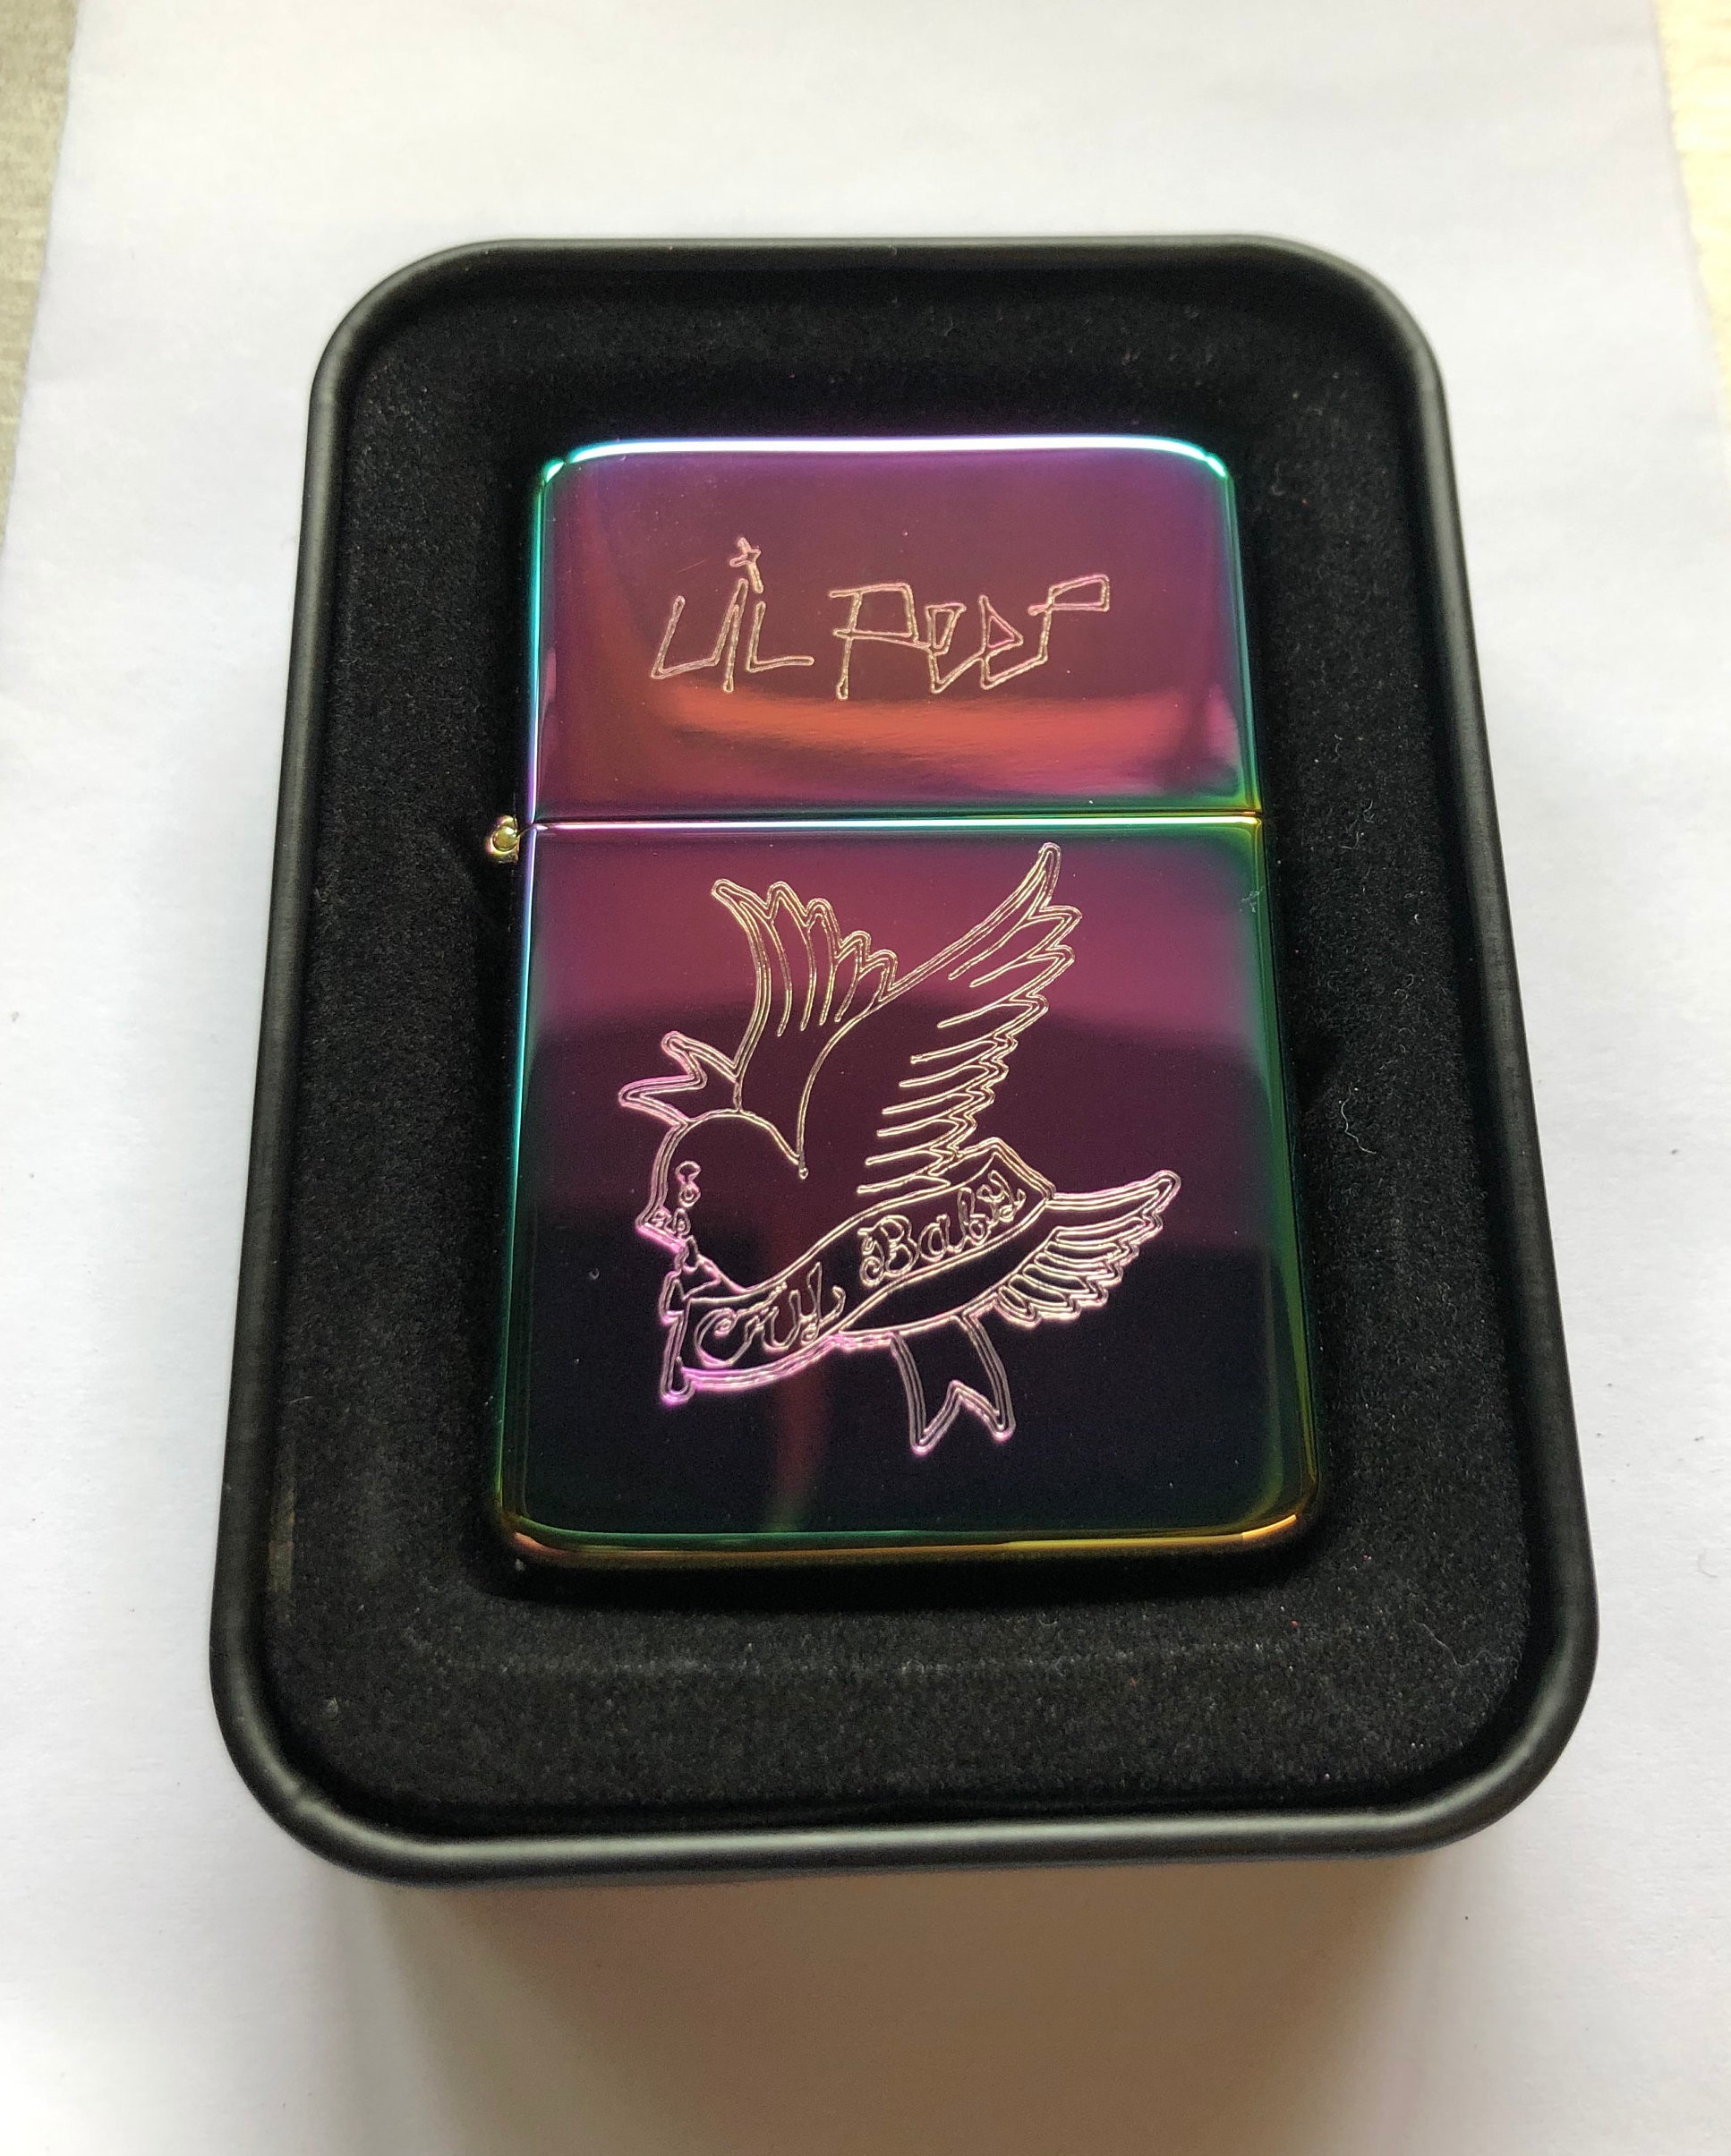 søm Agnes Gray global Lil Peep Solid Brass Lighter in a Rainbow Finish & Gift Tin - Etsy